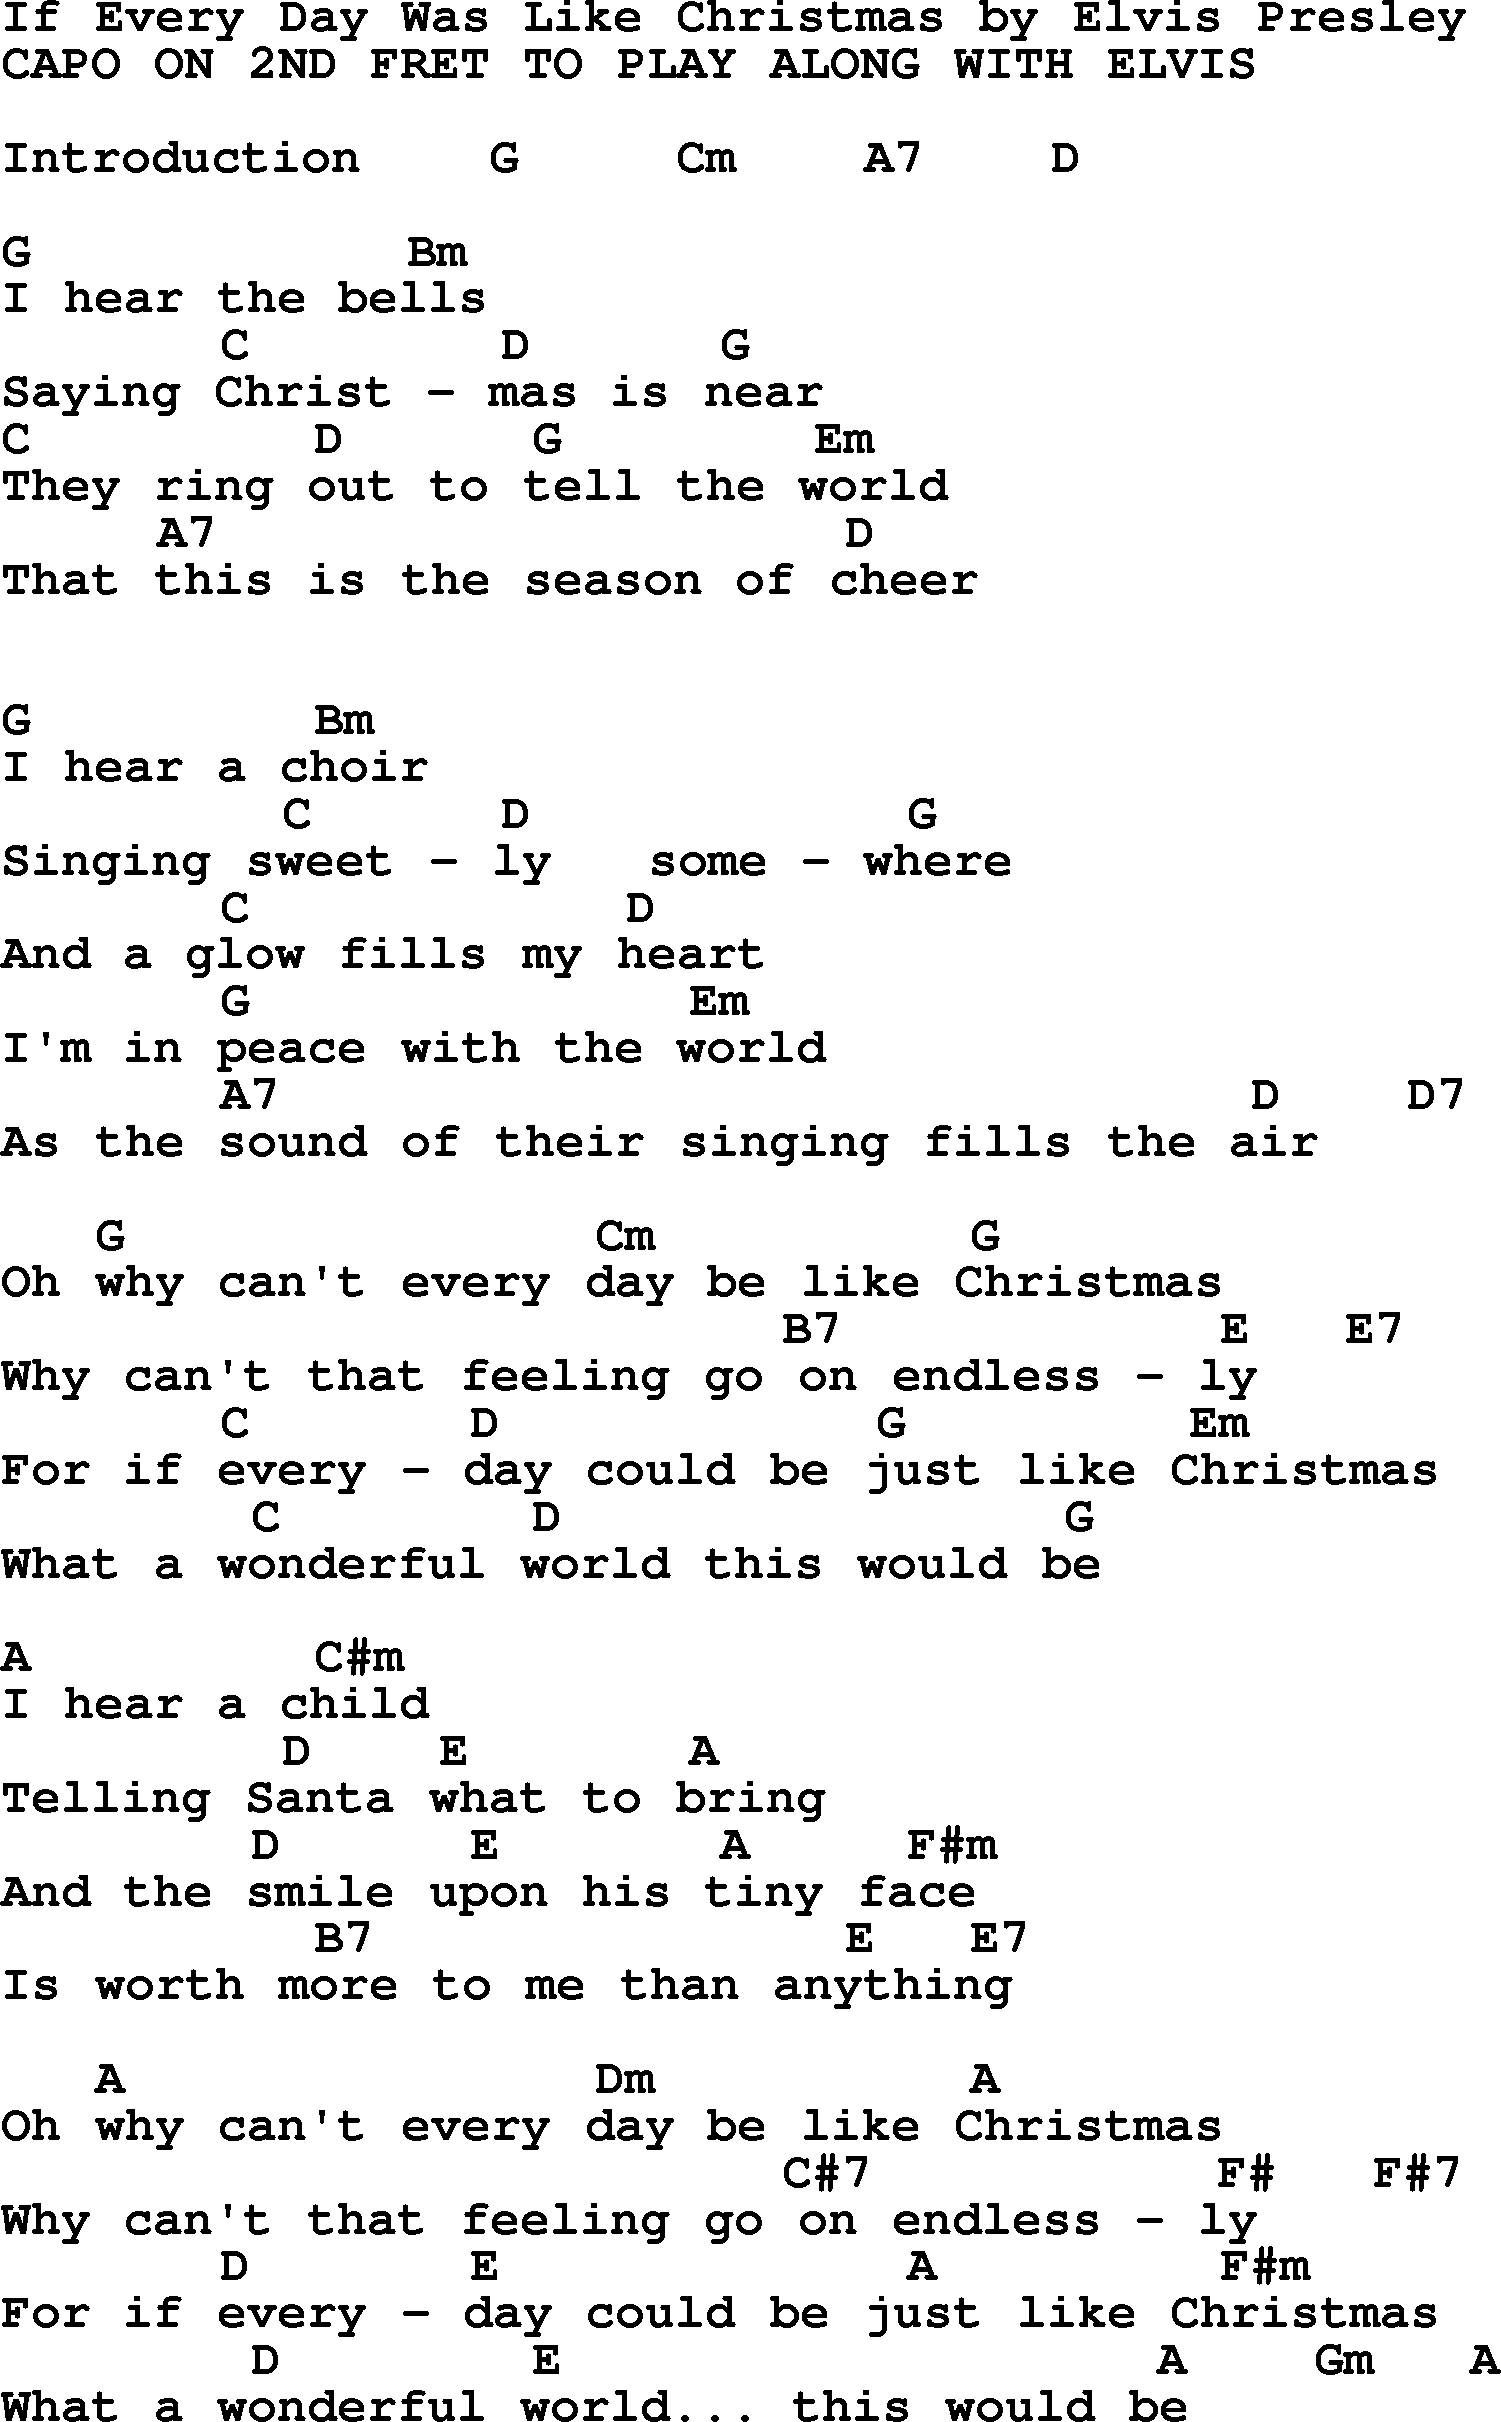 Elvis Presley song: If Every Day Was Like Christmas, lyrics and chords